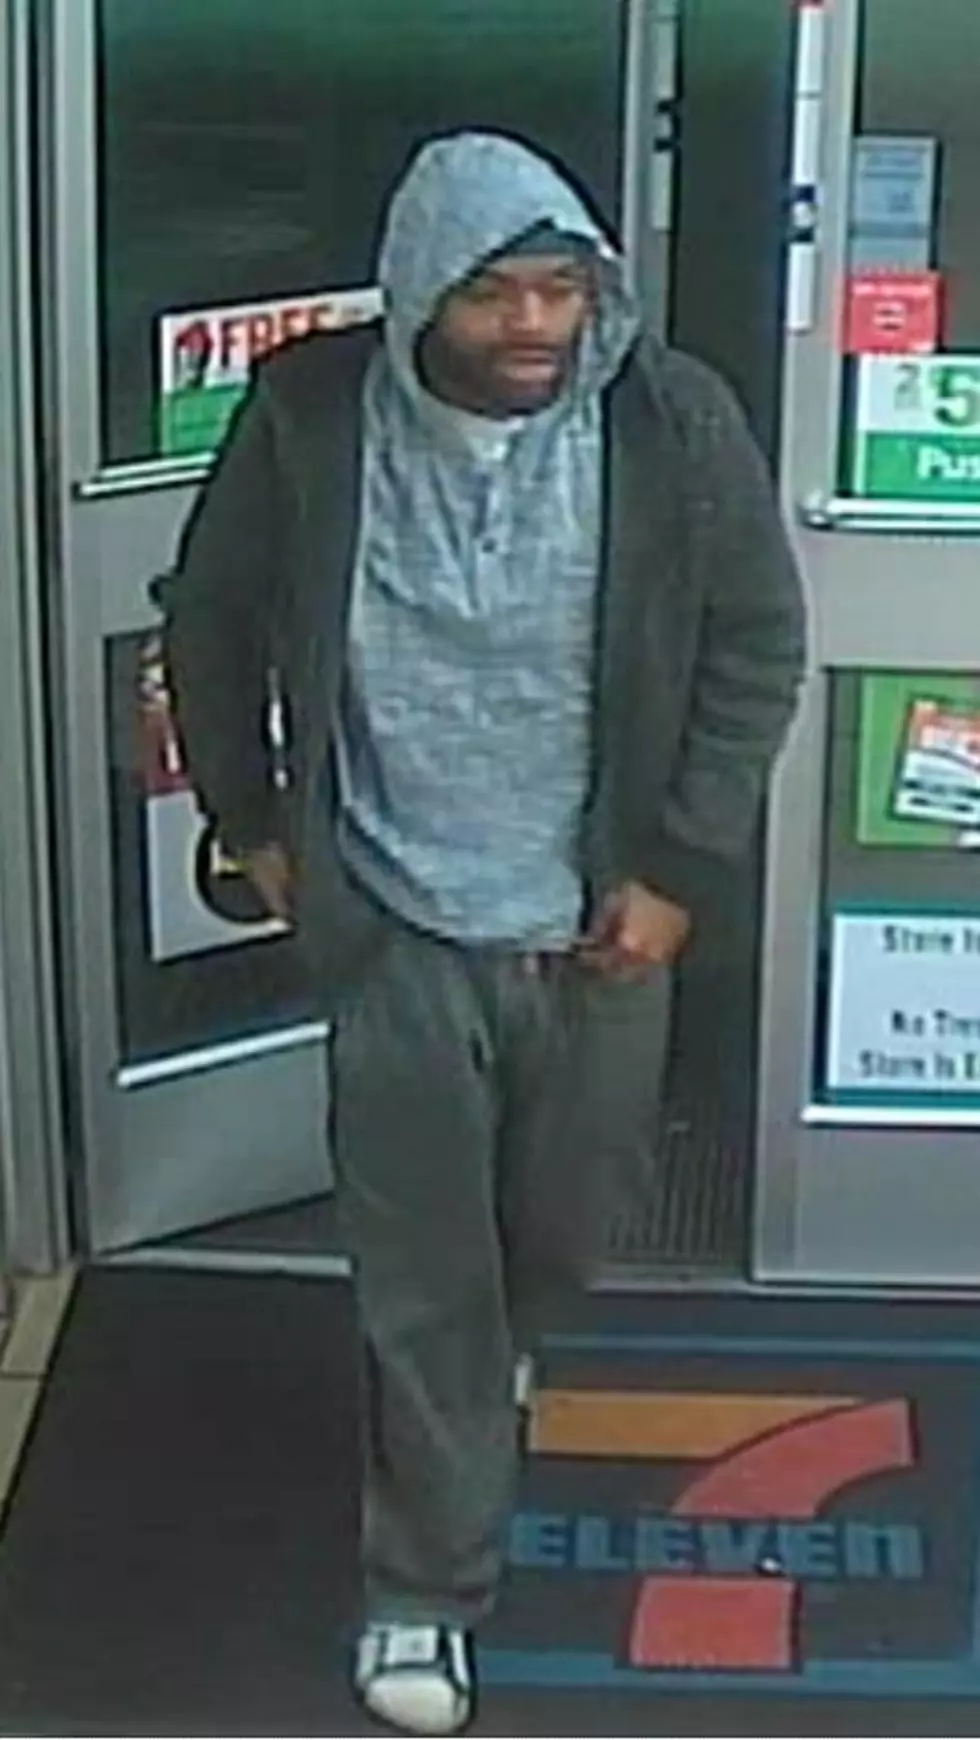 Copperas Cove Police Needs Help Identifying Debit Card Abuse Suspect